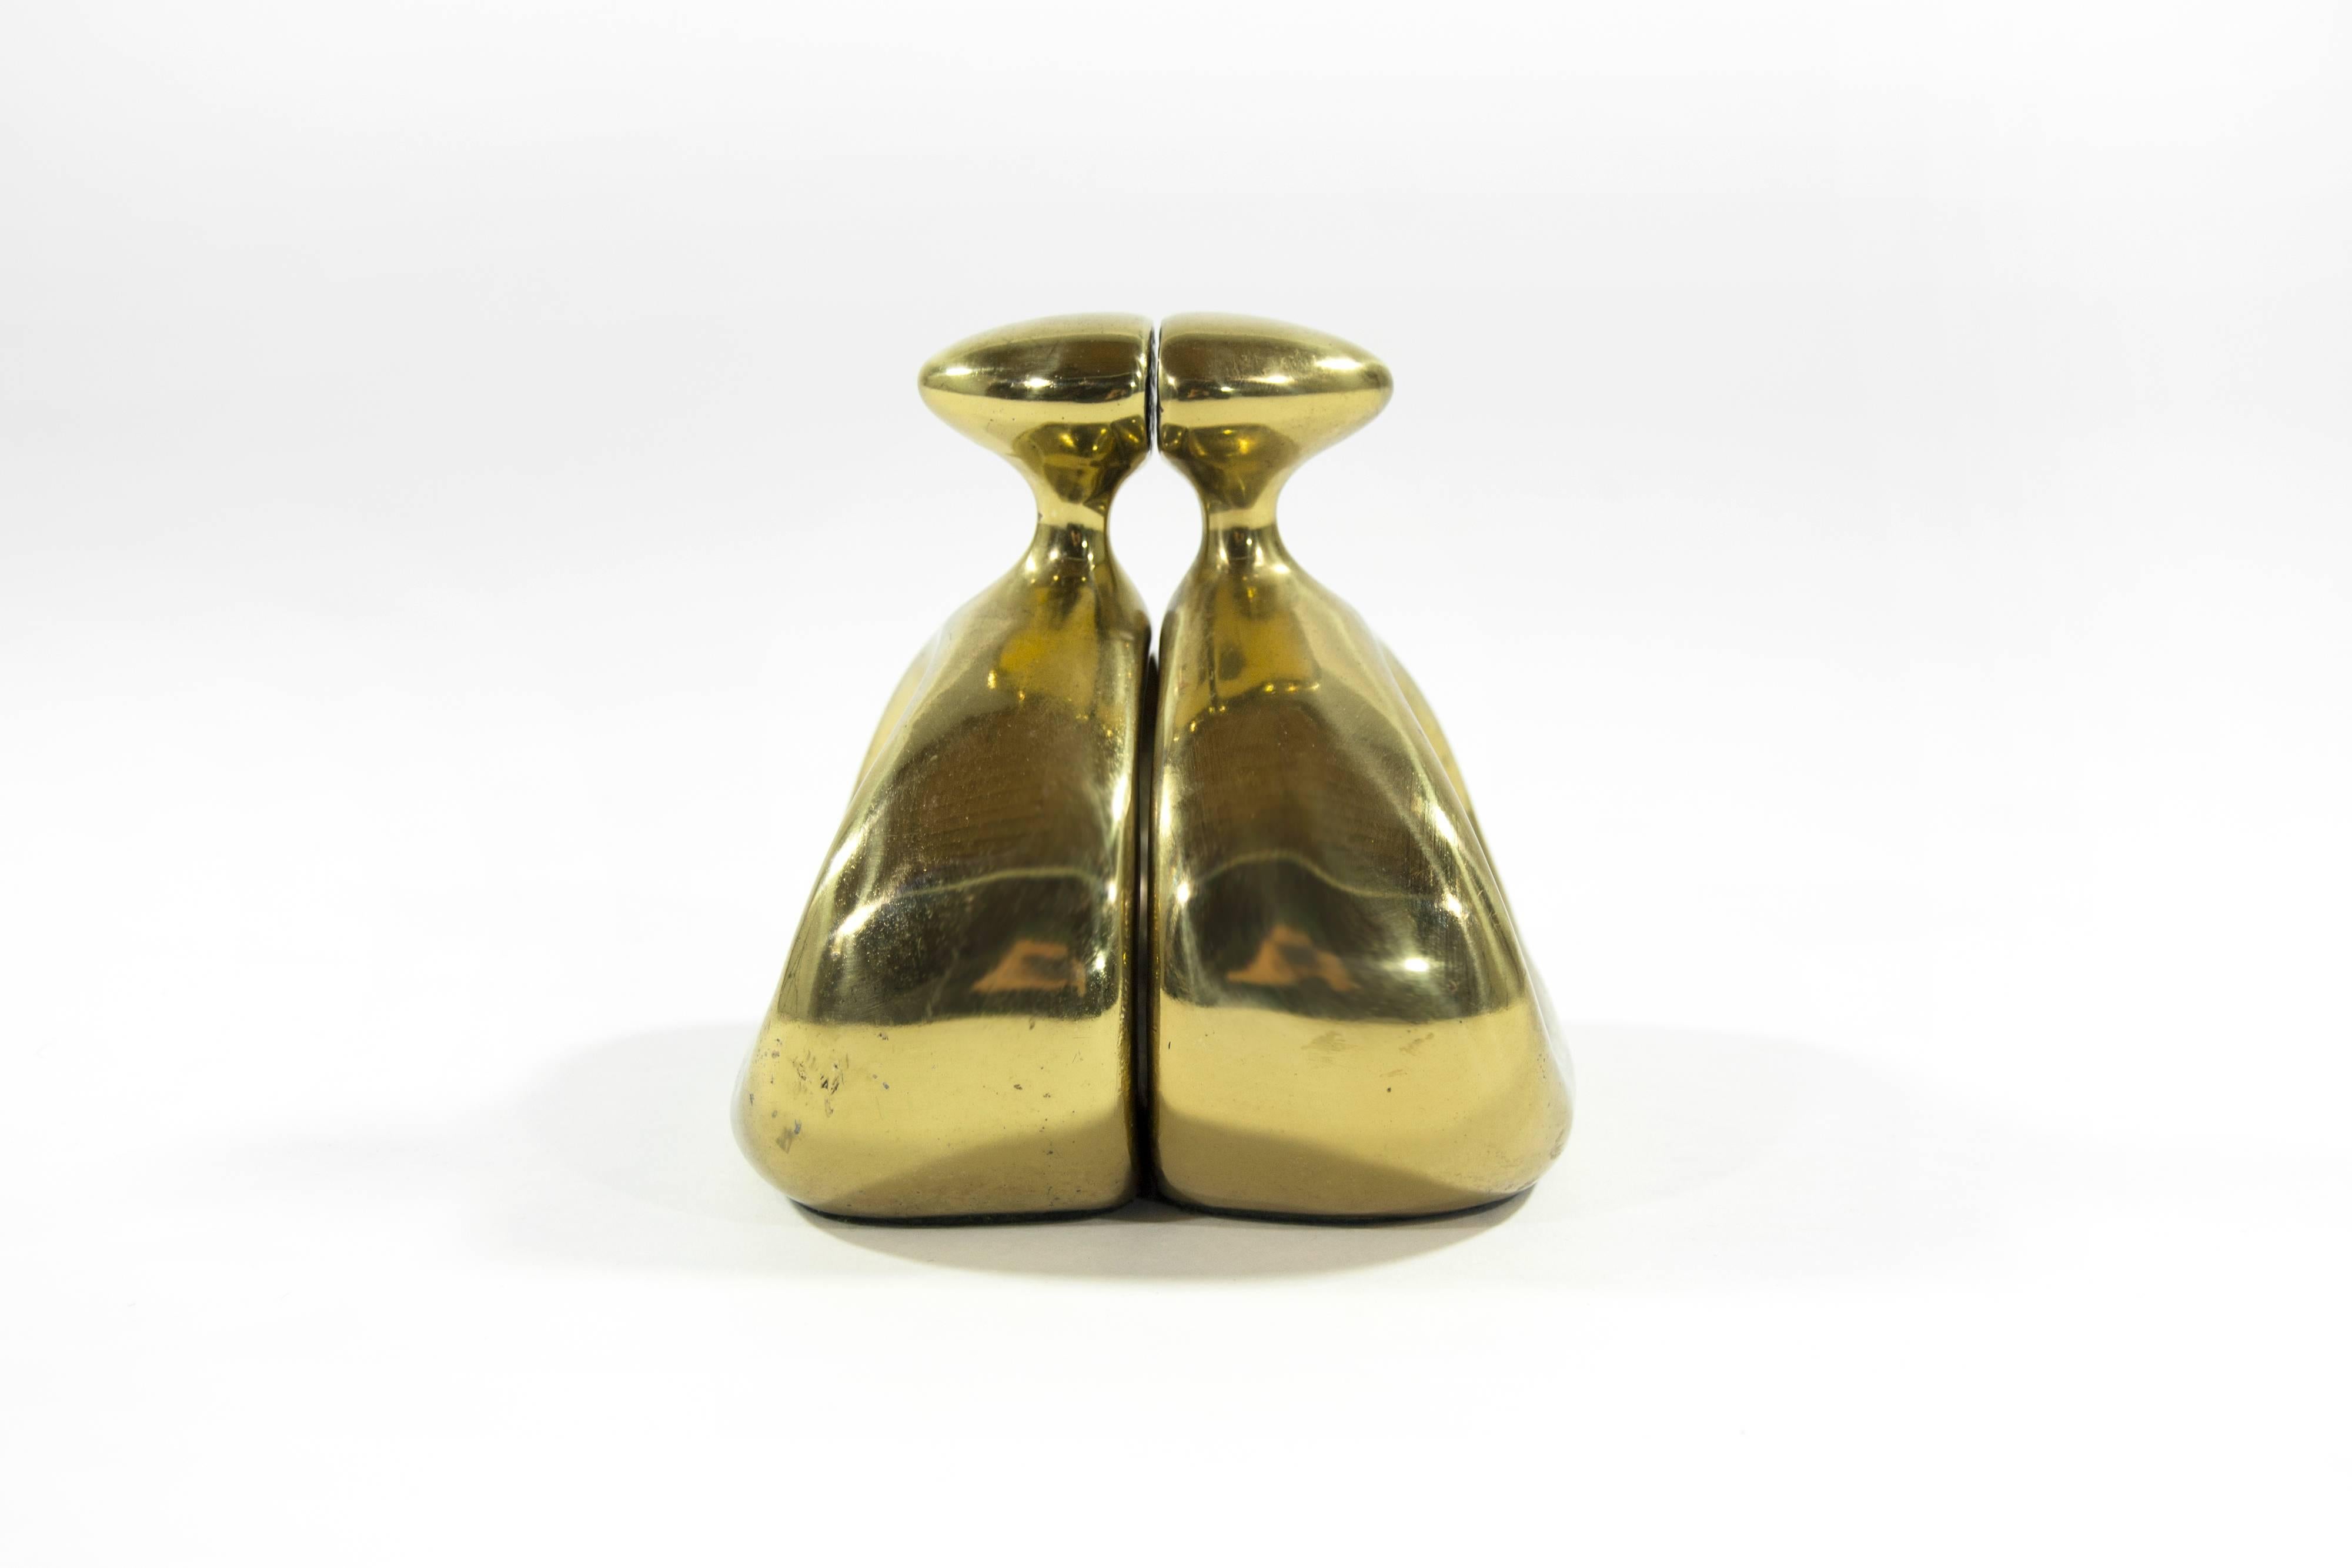 Sculptural pair of bronze bookends in a rounded triangle form with bullet like finials, an open sculptured body with a flared base. By Ben Seibel for Jenfred Ware, American, circa 1950.